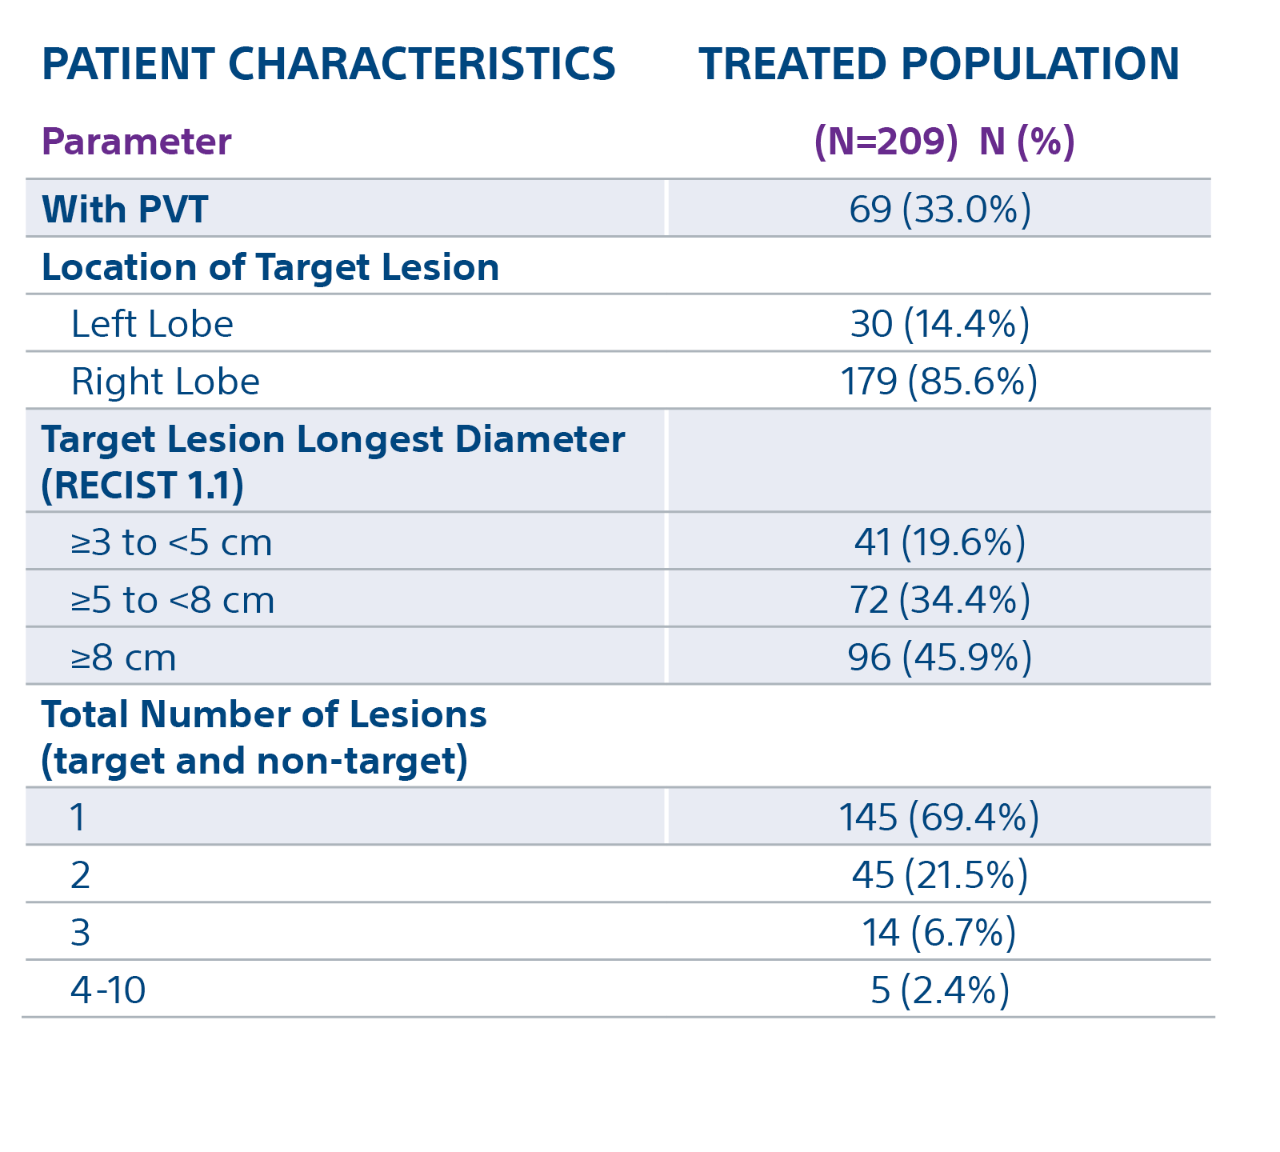 Table on patient characteristics, parameter, and treated population (N-209) N (%); parameters are With PVT, Location of Target Lesion, Target Lesion Longest Diameter (RECIST 1.1), Total Number of Lesions (target and non-target).